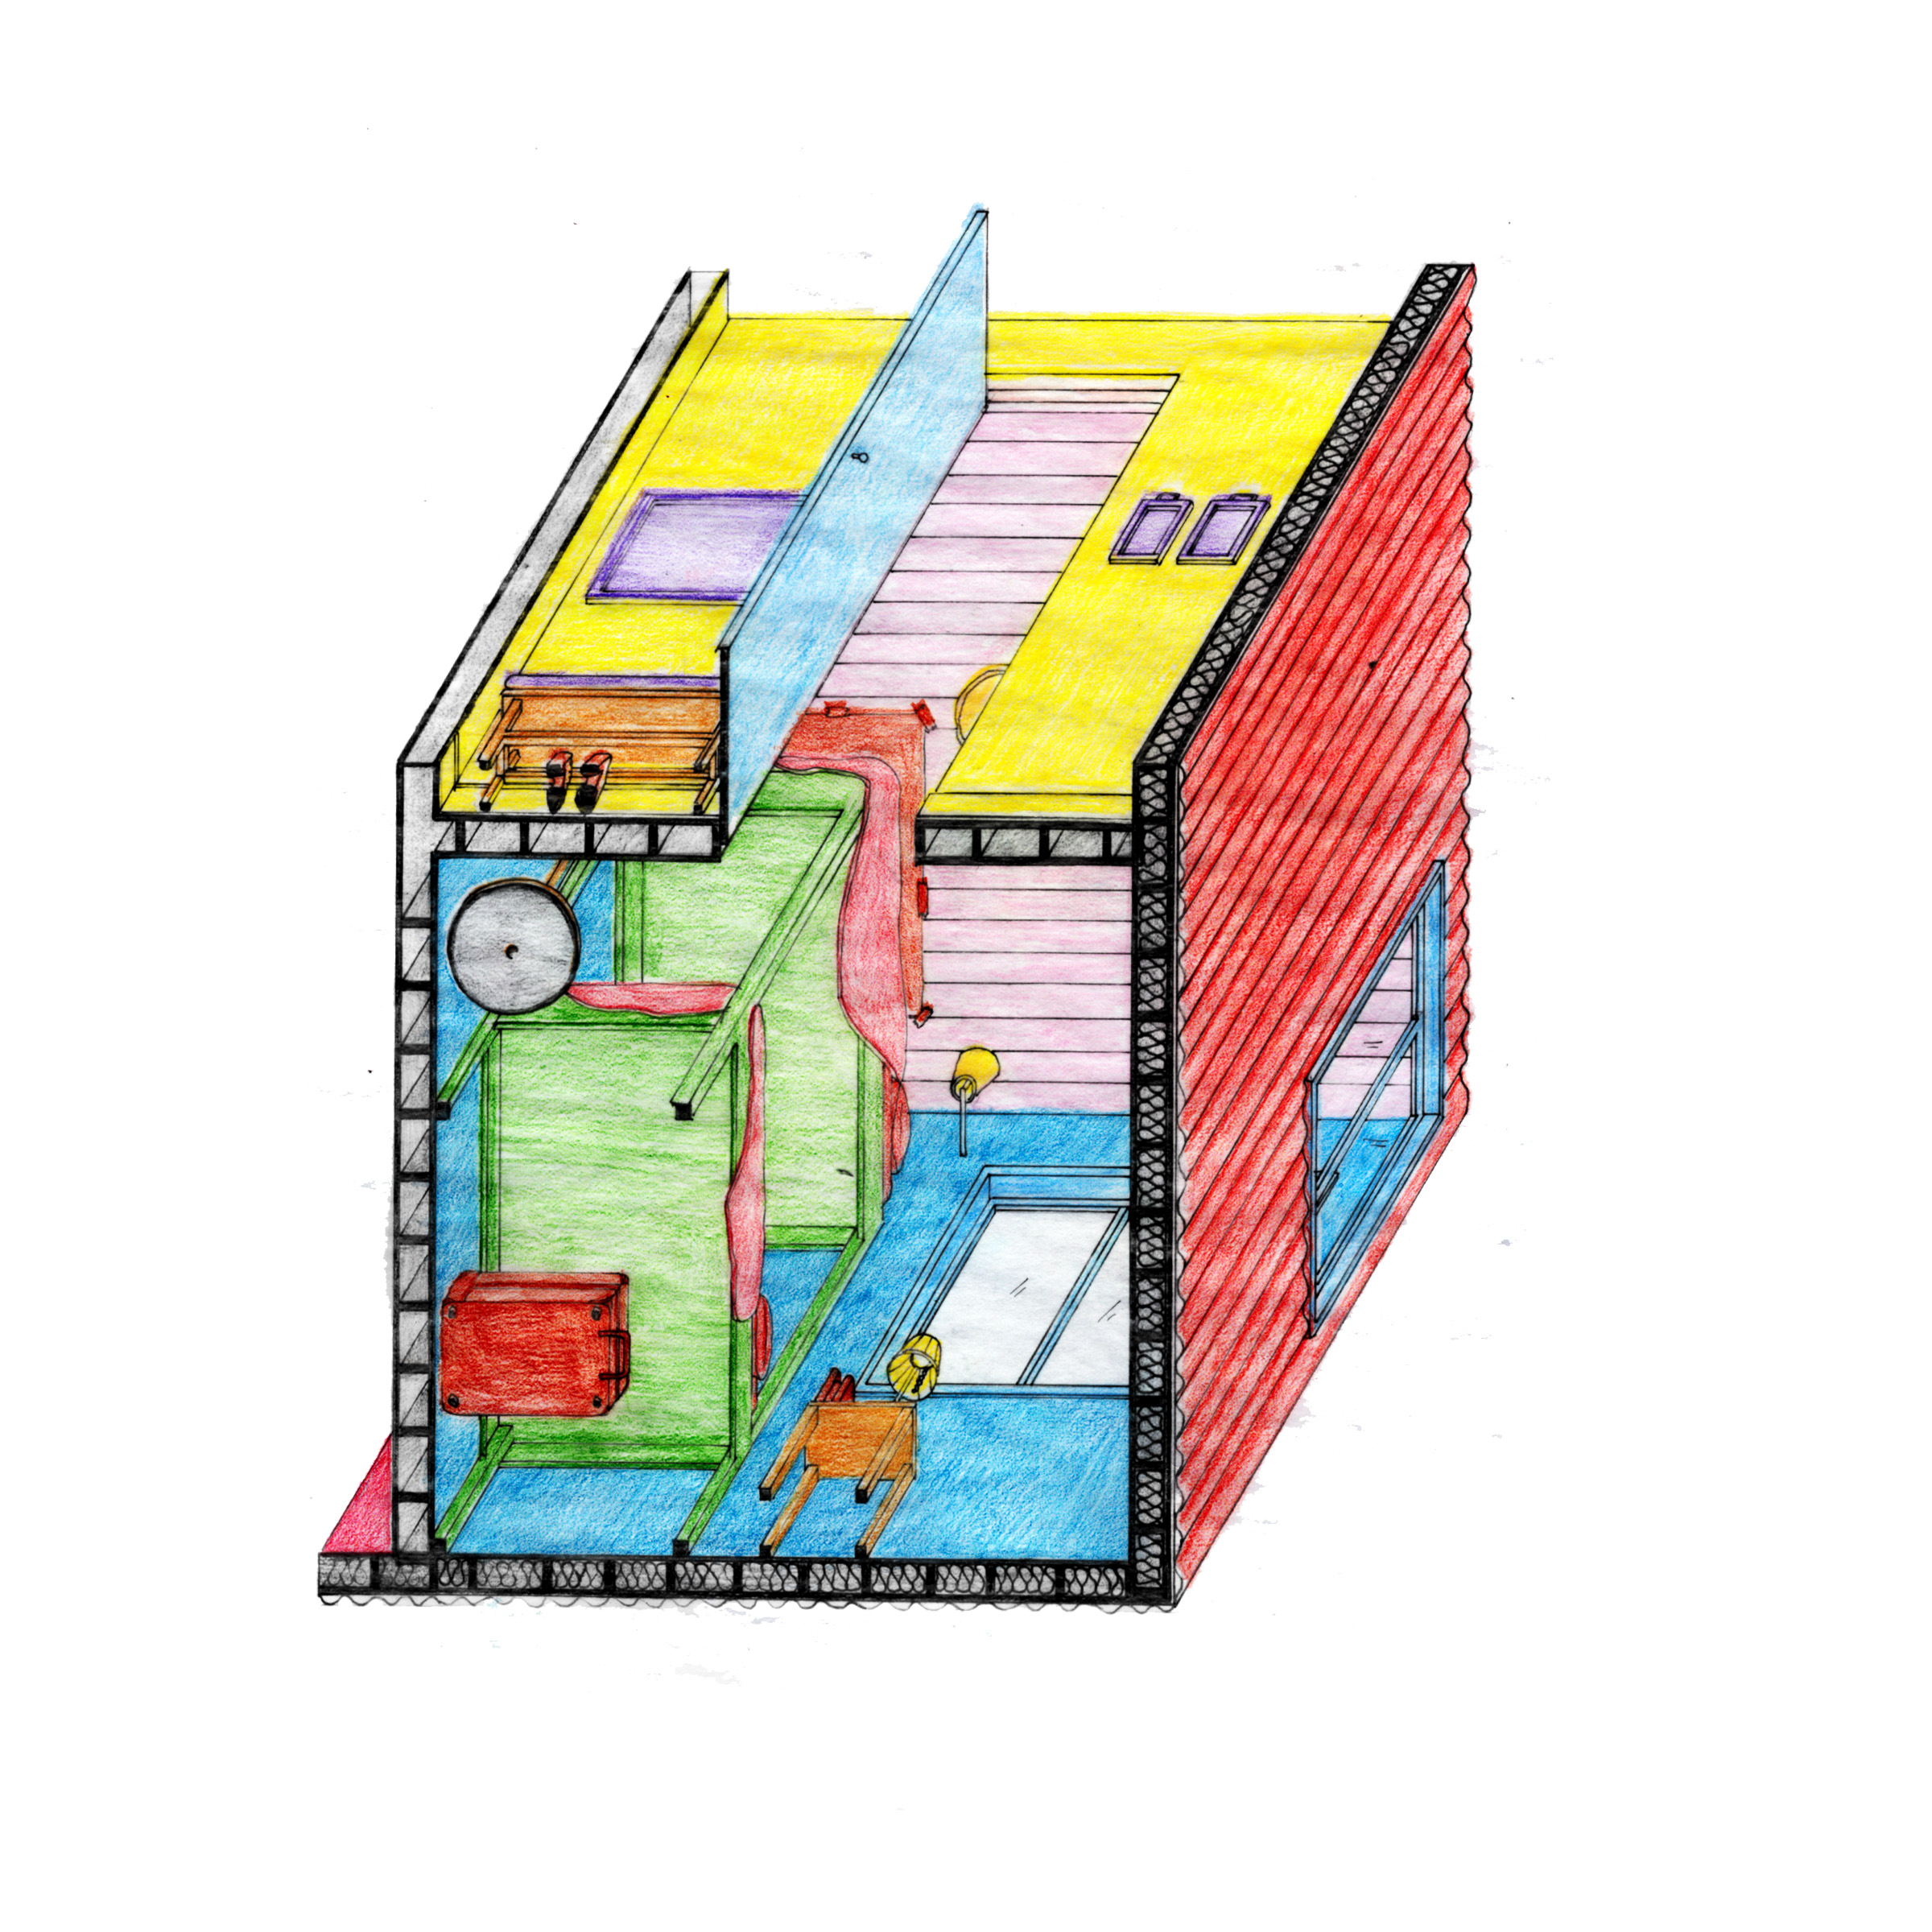 Primary colour pencil crayons and pen drawing of a bedroom, drawn from below. A typical inaccessible kid room with bunk beds, tight turns, and a narrow door.